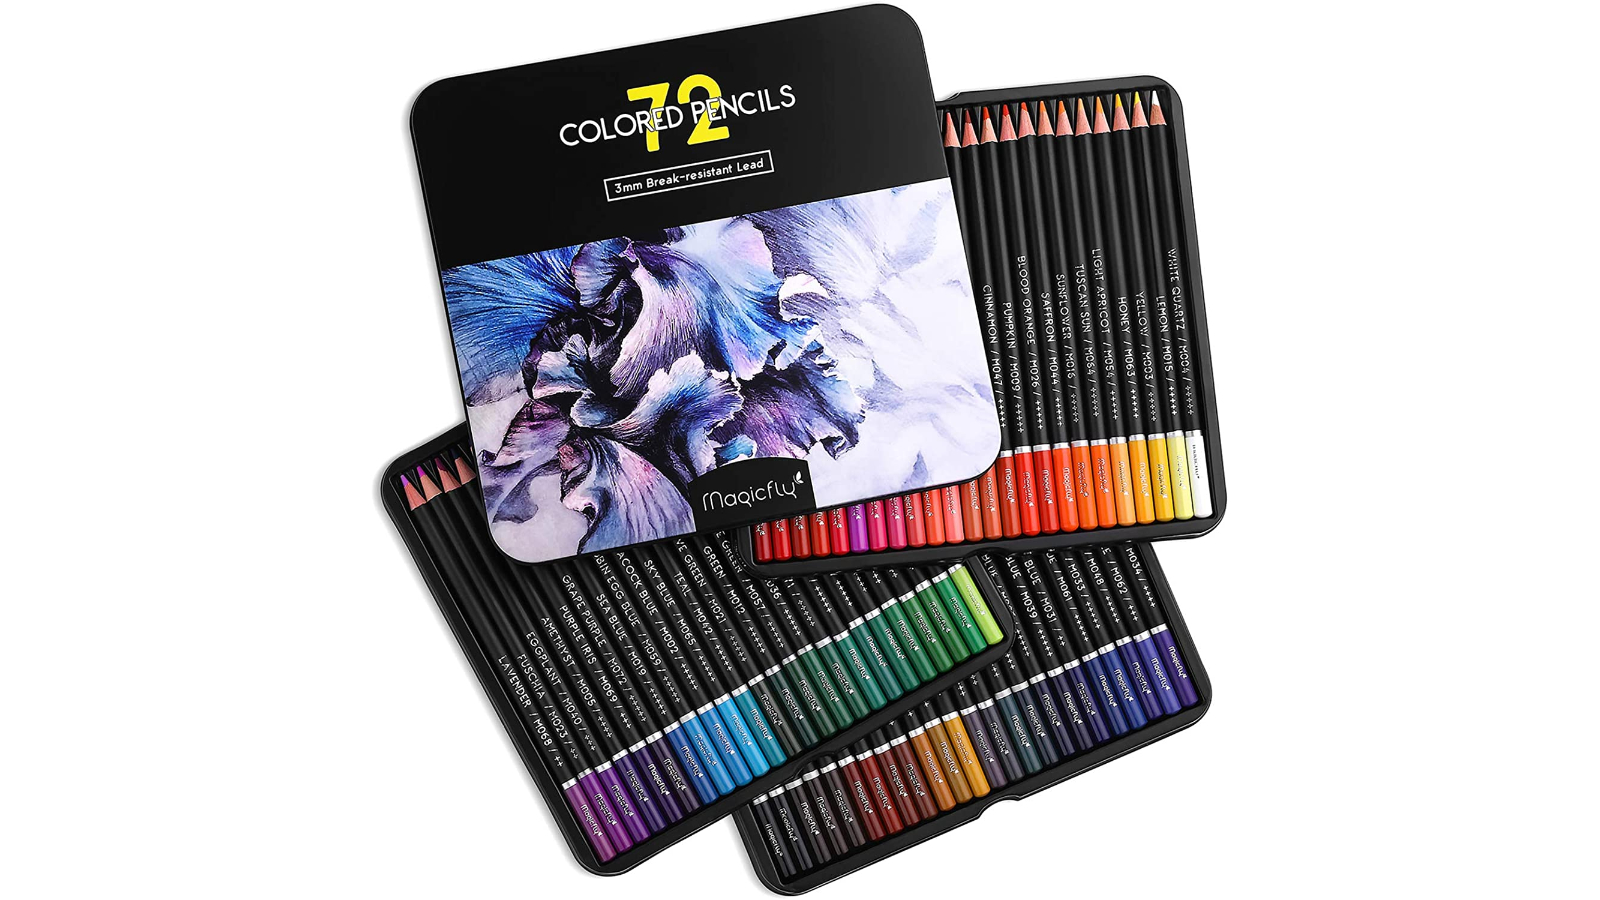 Best coloured pencils: Magicfly Colored Pencils